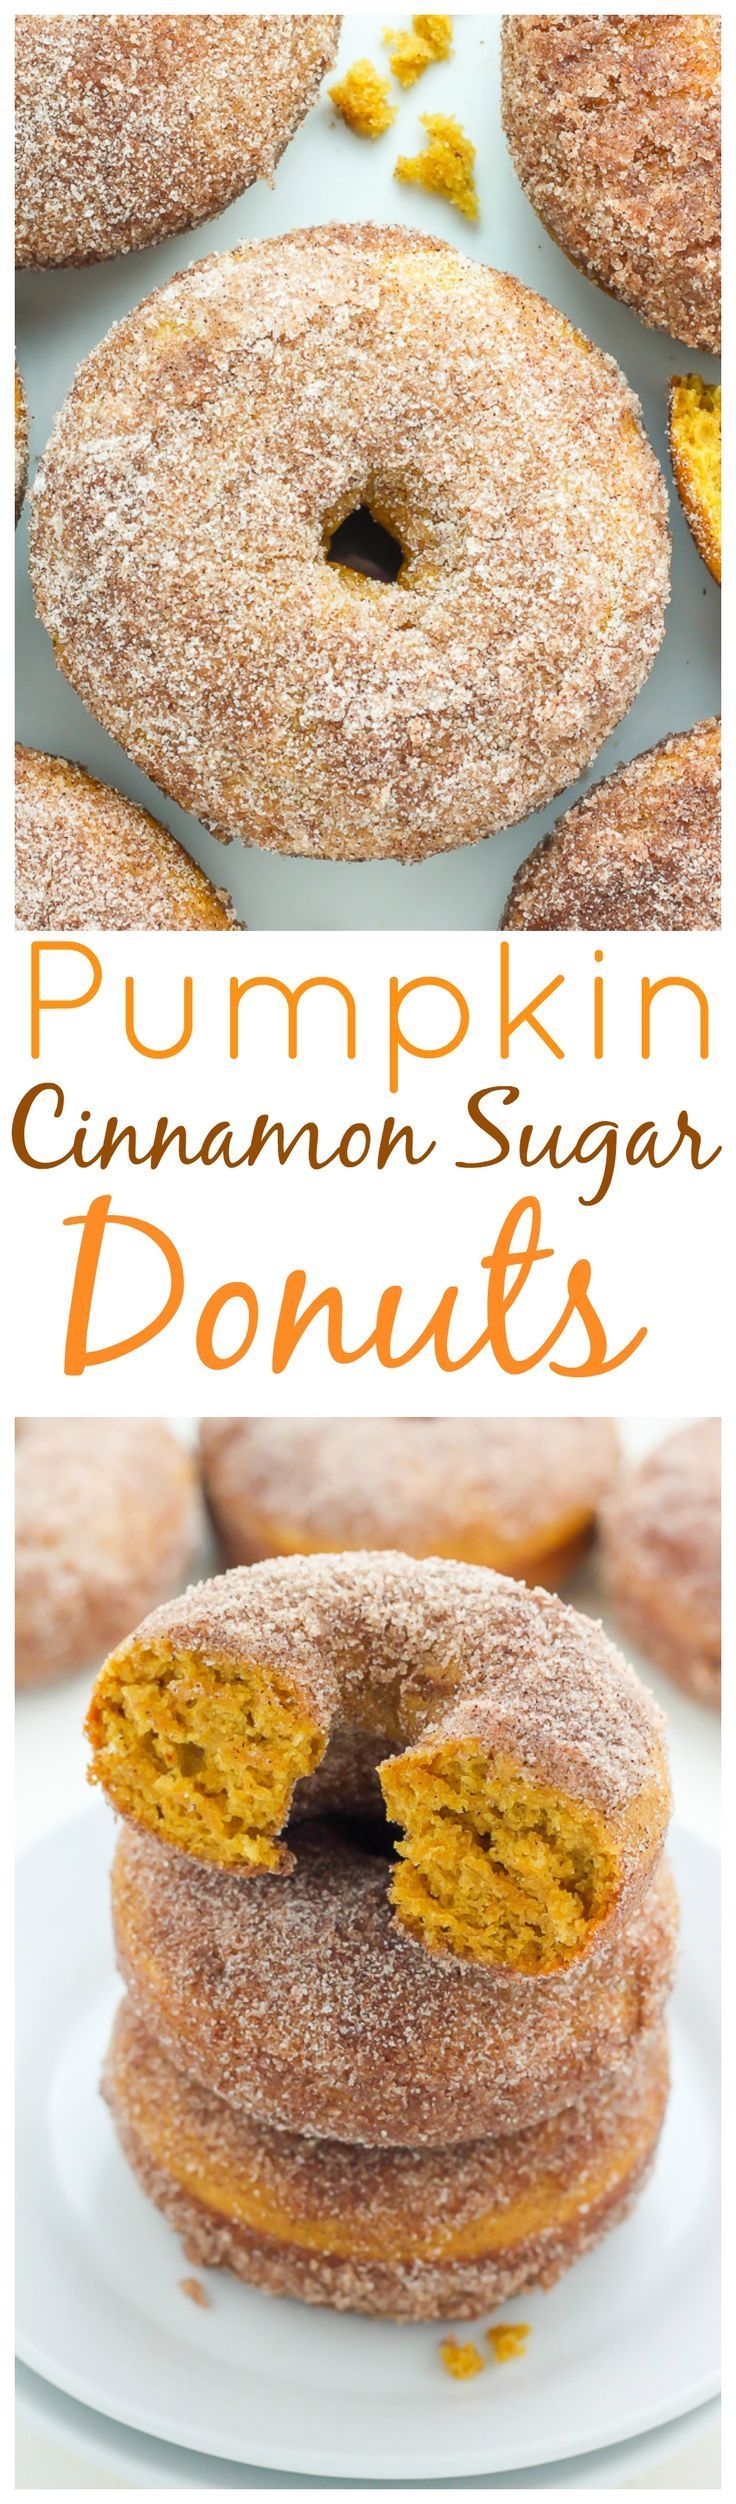 Pumpkin Cinnamon Sugar Donuts – super soft, fluffy, and loaded with pumpkin flavor! The best part? Theyre ready in 20 minutes!